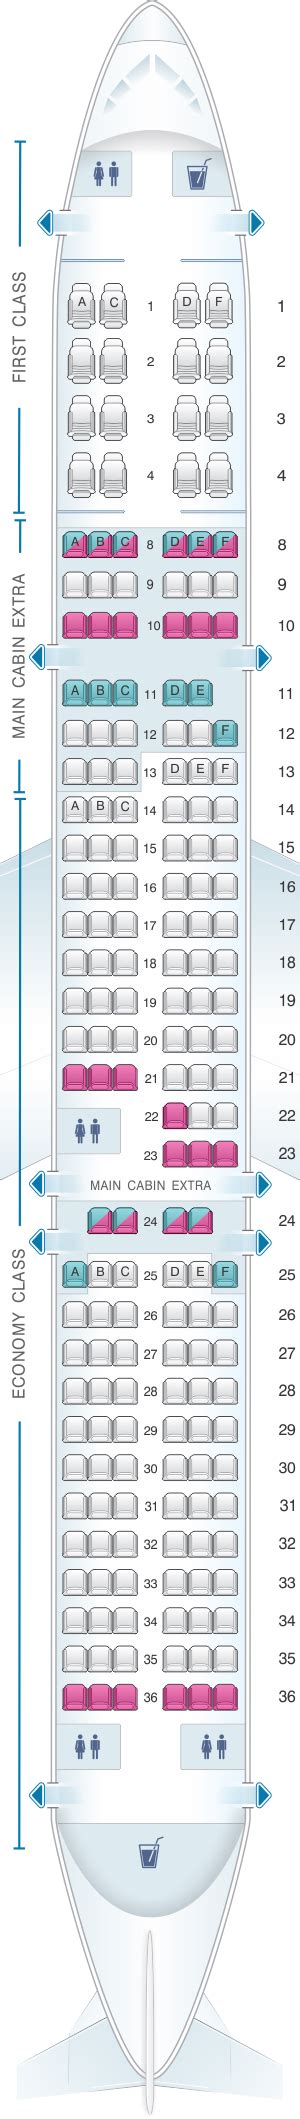 A321 seat map american. The Delta Airlines Airbus A321 features 192 seats in a 4 cabin configuration. Economy has 143 seats in a 3-3 config; Premium economy has 29 seats in a 3-3 config; Business class has 12 seats; First class has 20 seats in a 2-2 config; this is pretty standard for these aircraft. 